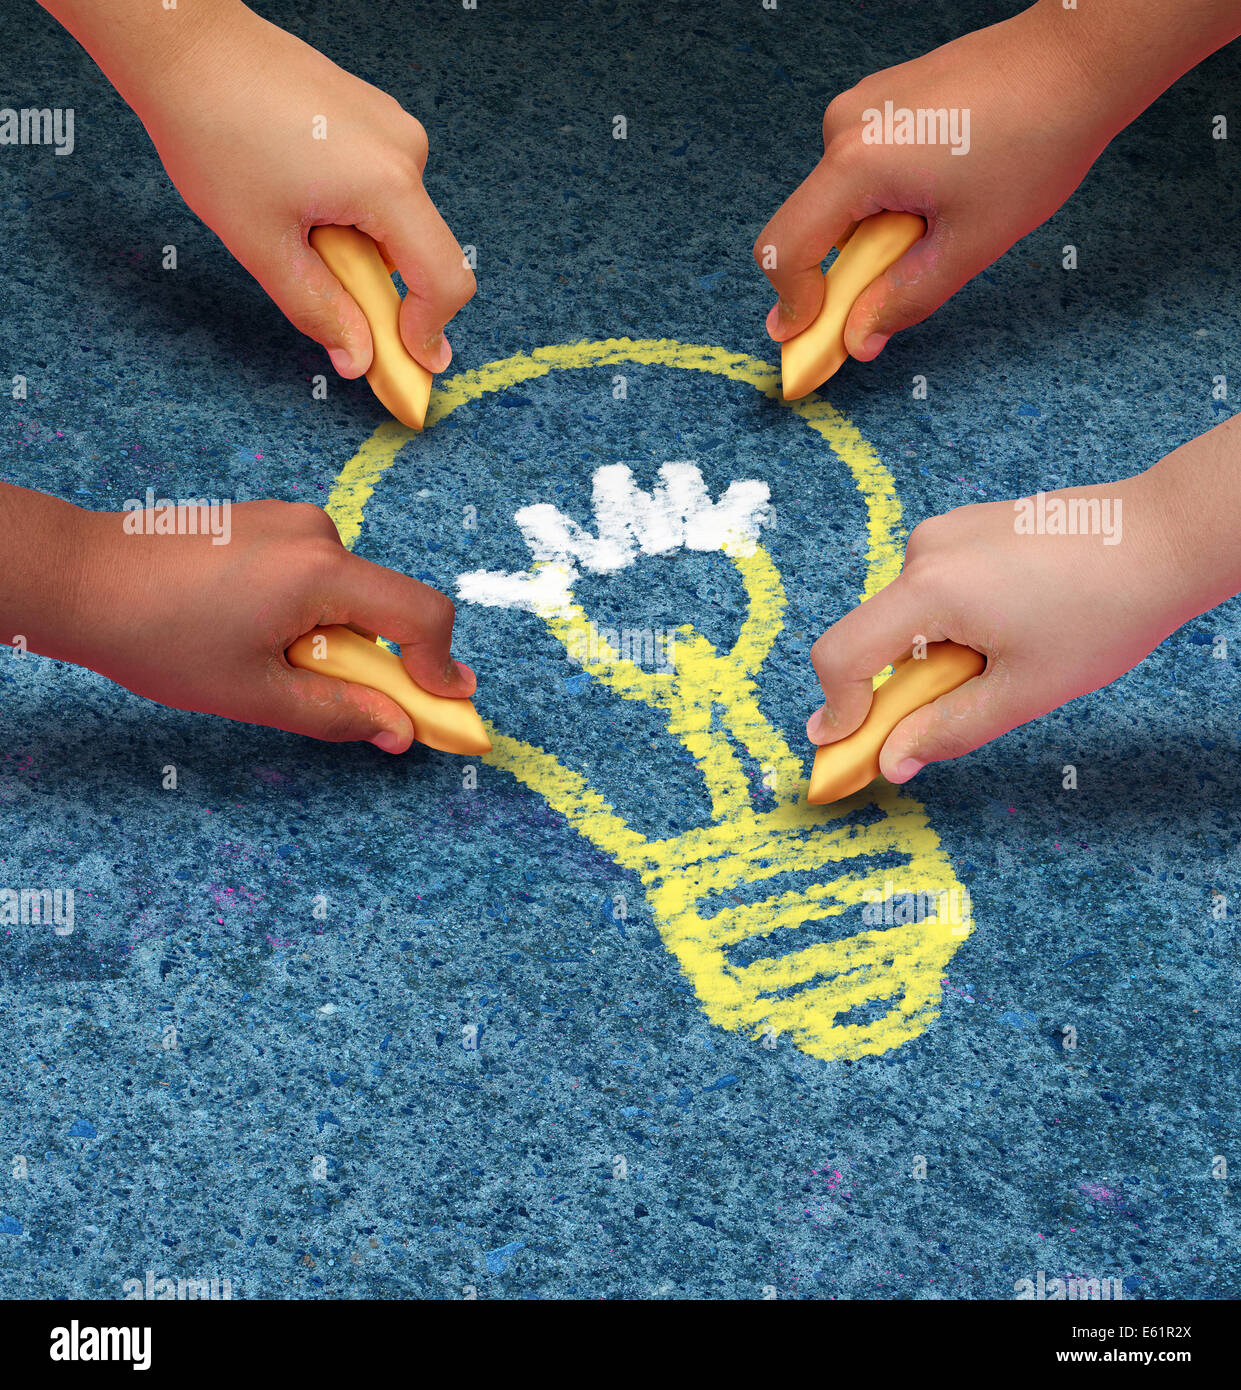 Community ideas education concept as a group of children hands holding chalk drawing a lightbulb icon on a pavement floor as a s Stock Photo